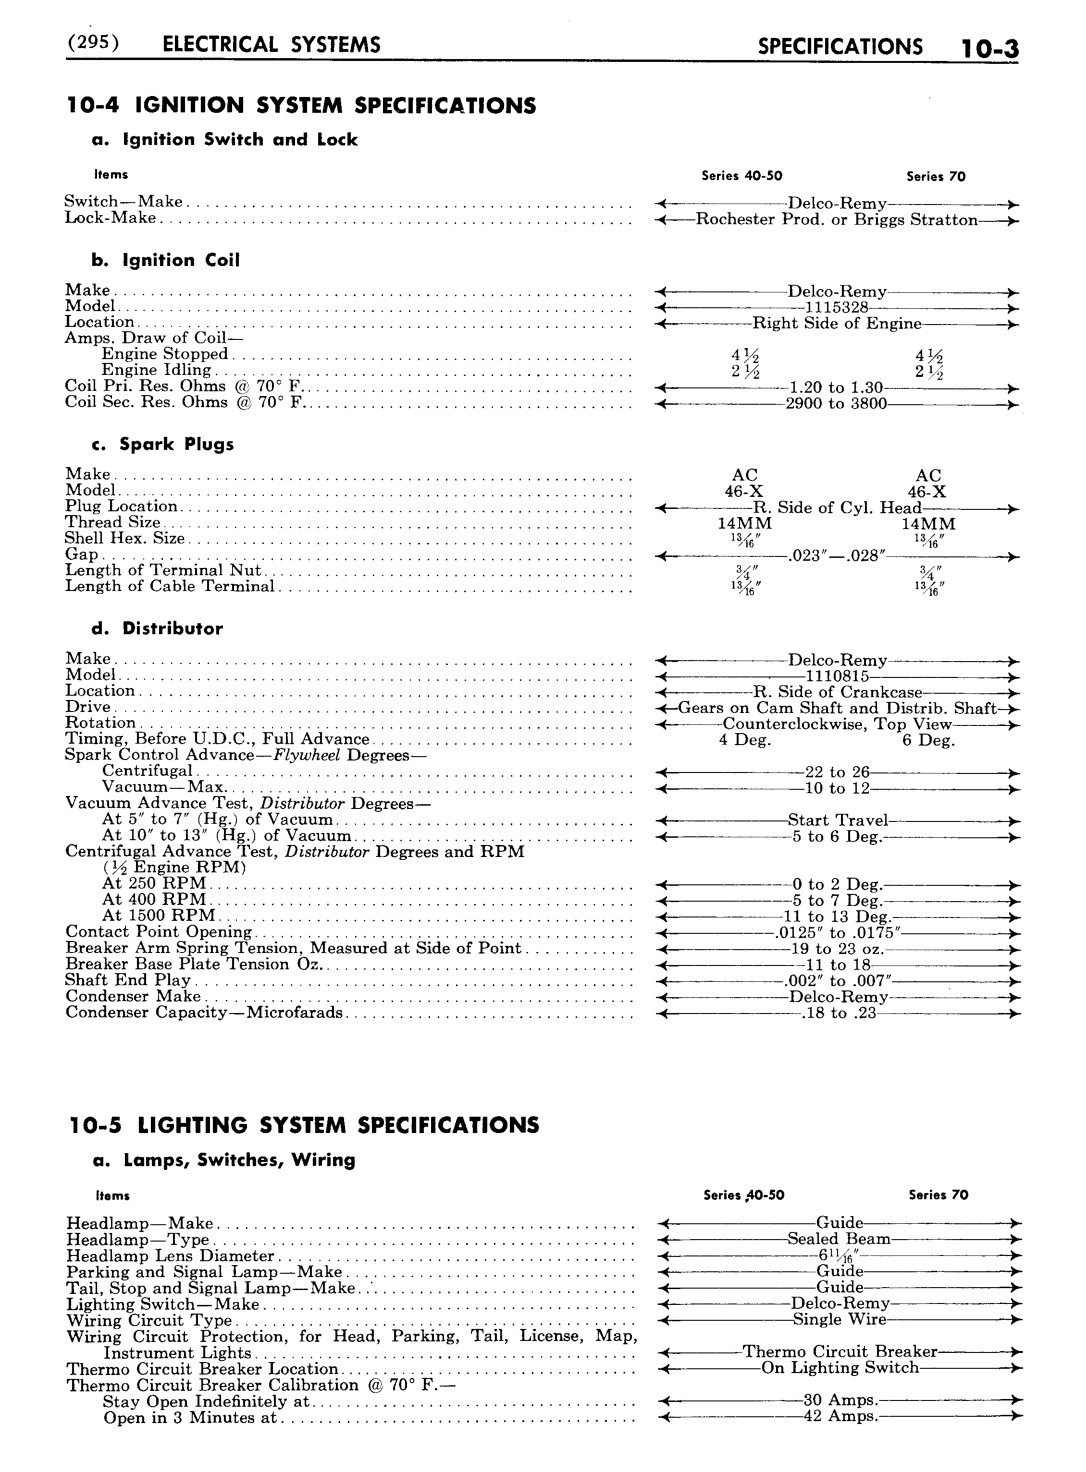 n_11 1951 Buick Shop Manual - Electrical Systems-003-003.jpg